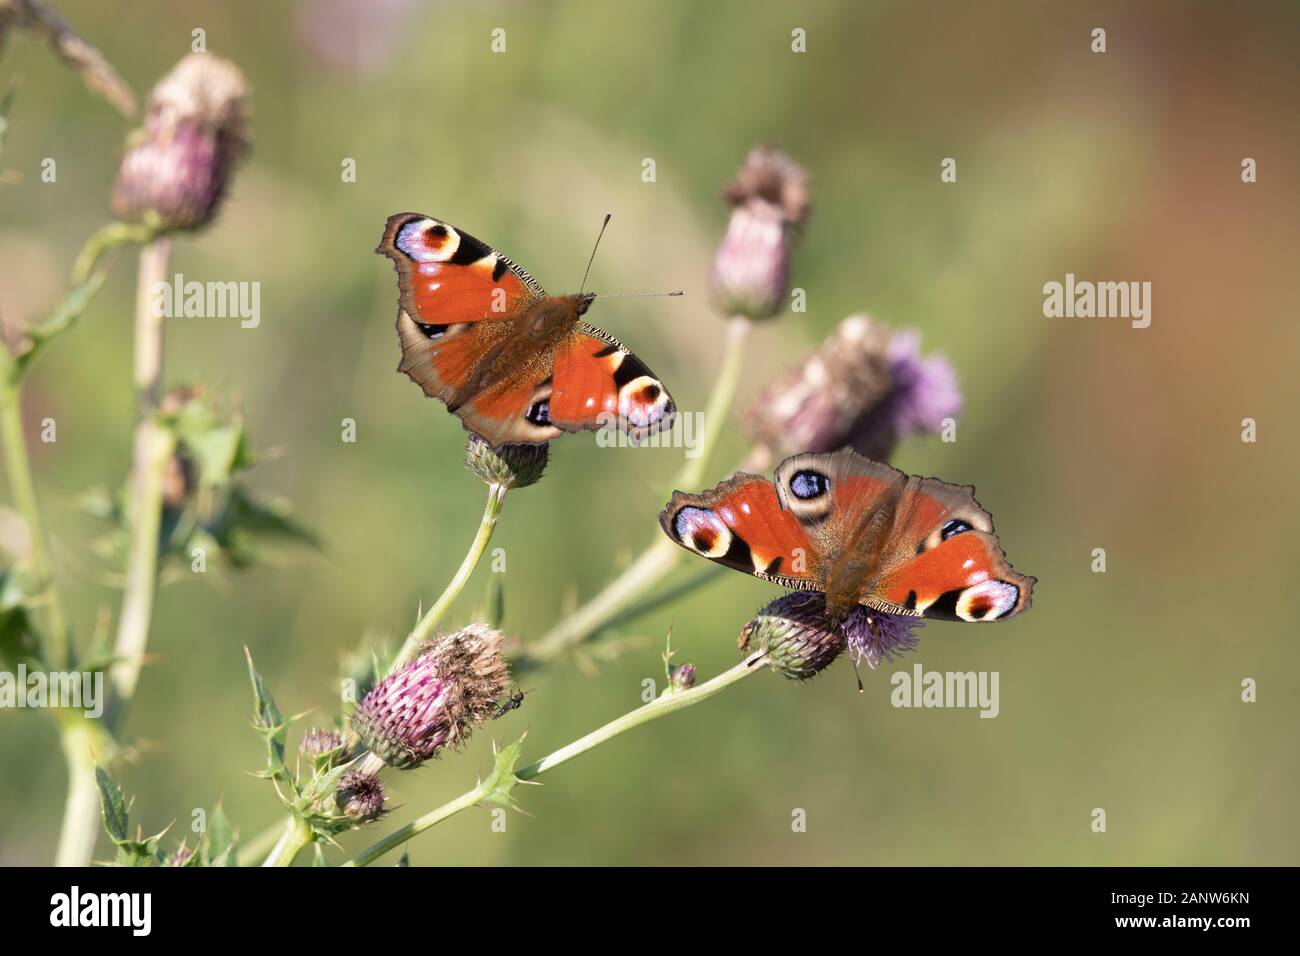 A Pair of Peacock Butterflies (Aglais Io) Side by Side on the Flowers of Creeping Thistle (Cirsium Arvense) Stock Photo